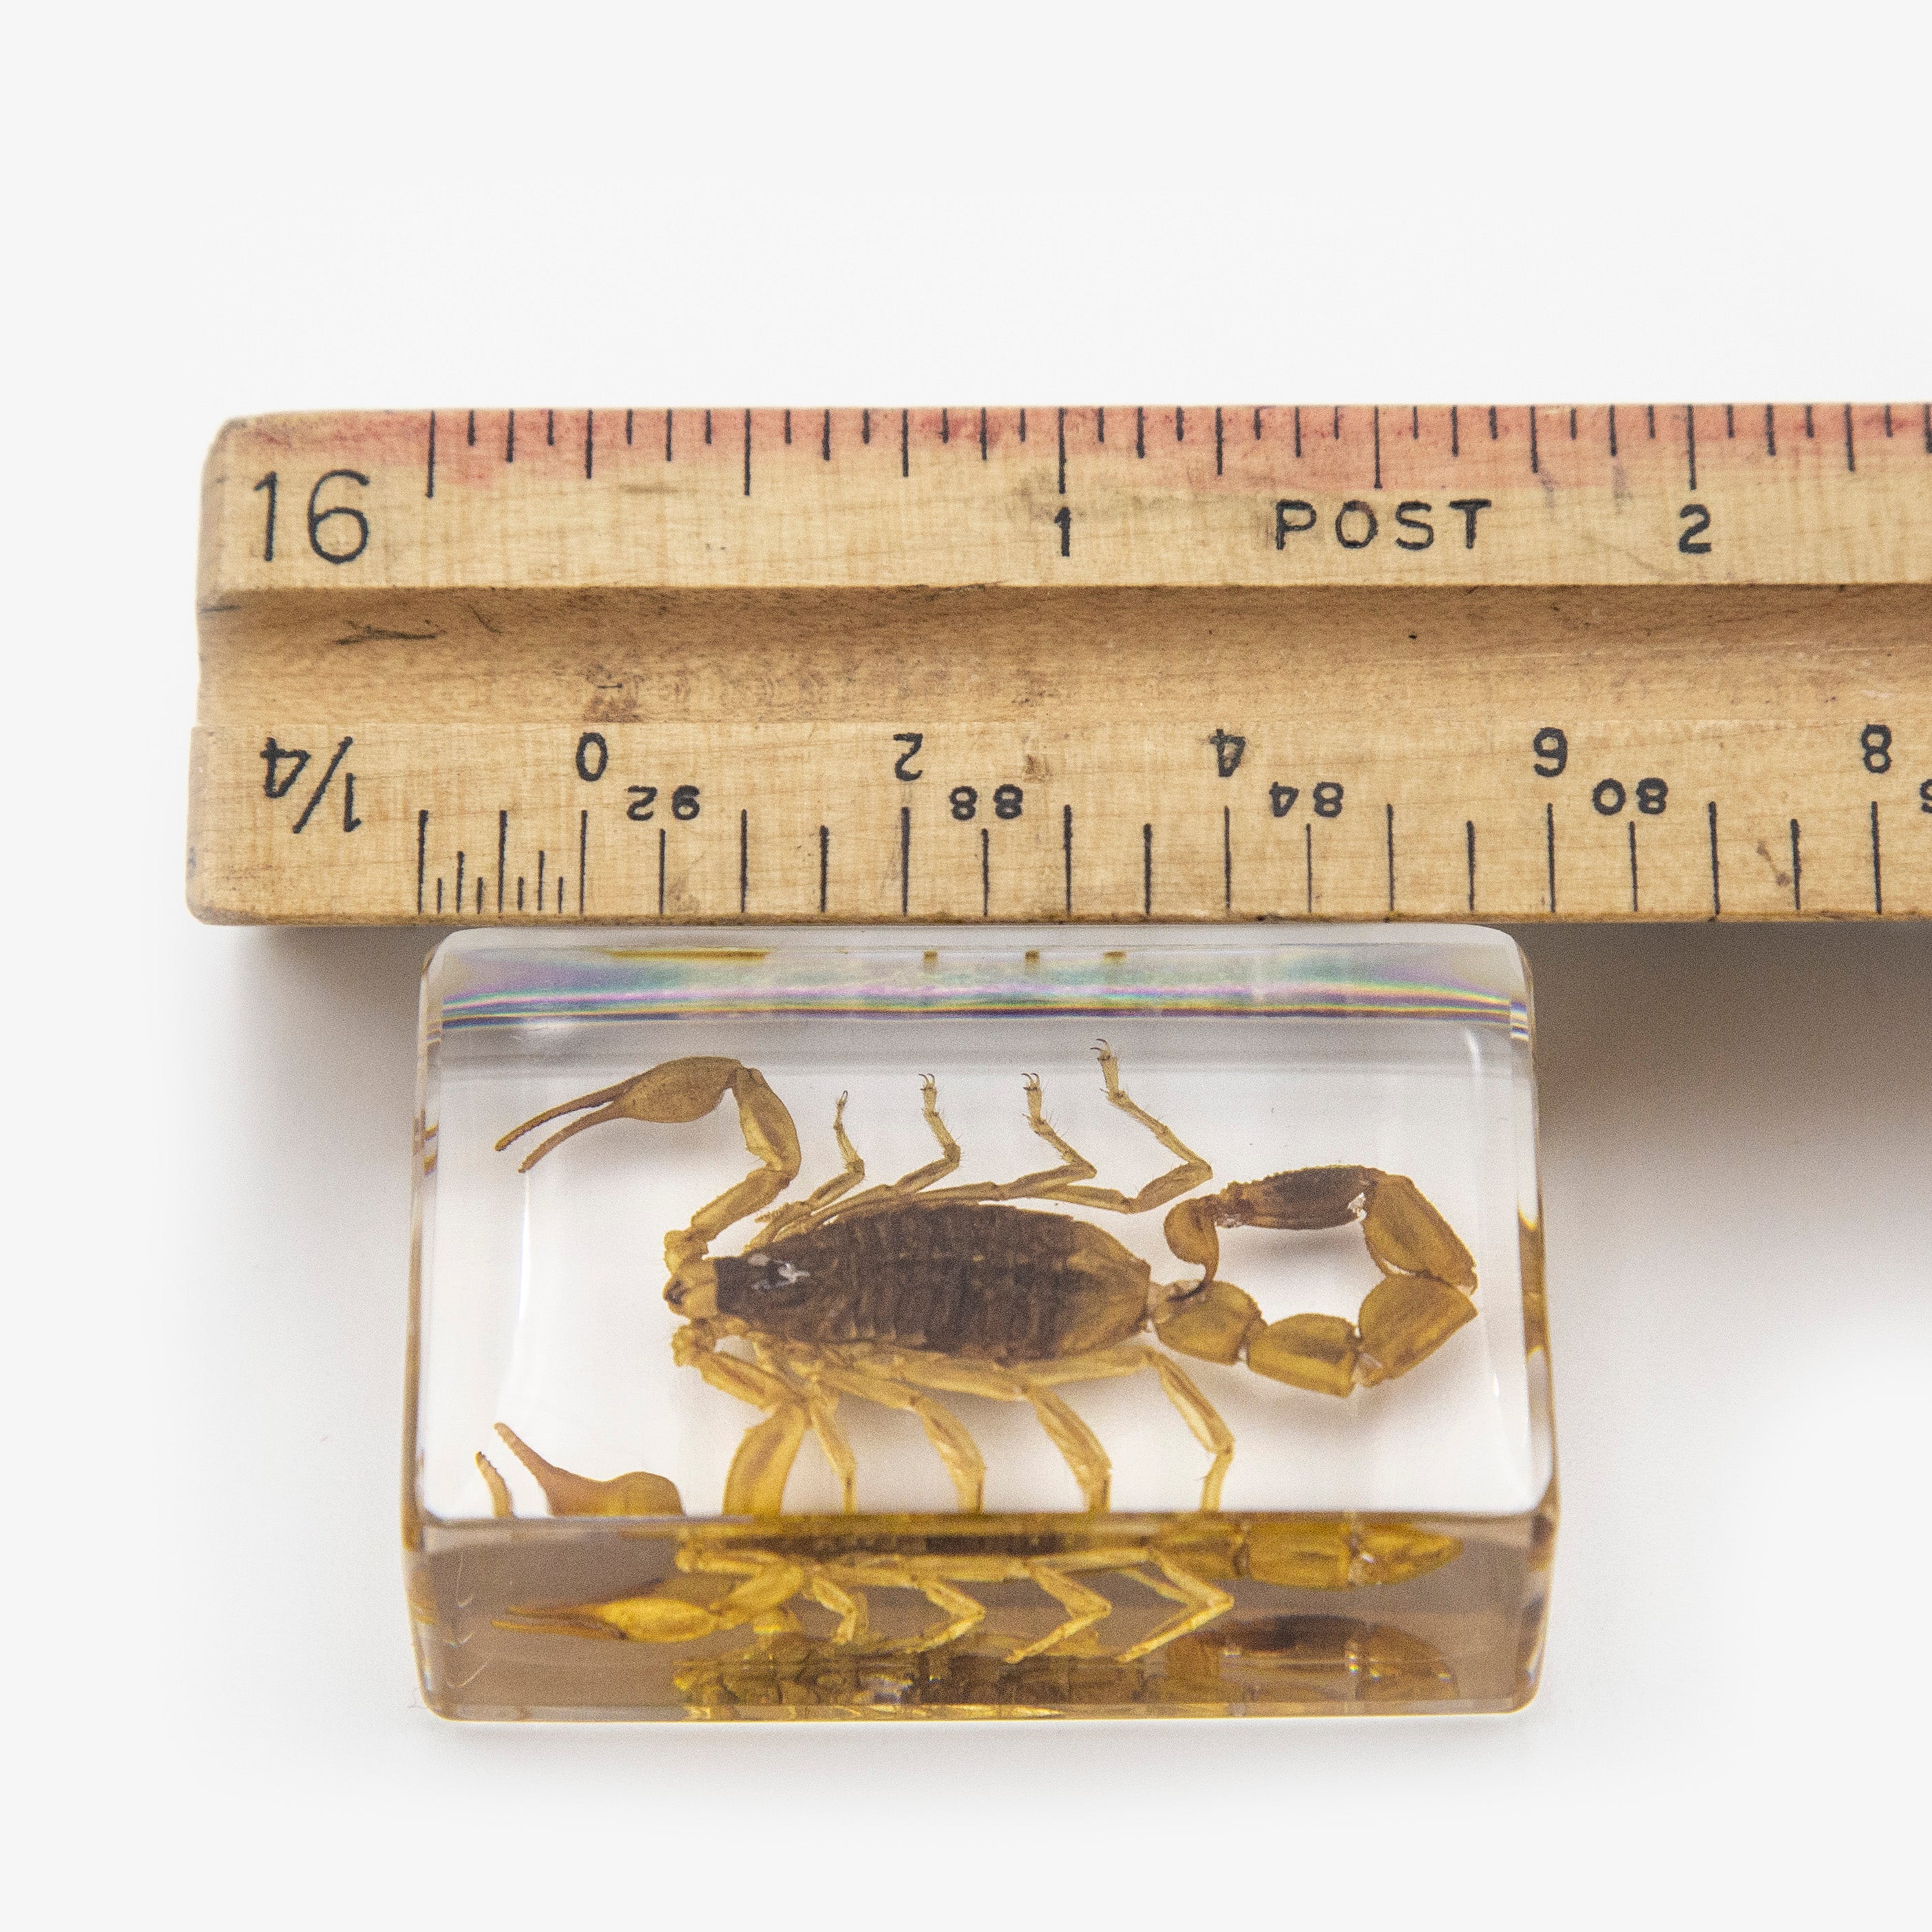 Golden Scorpion Resin Paperweight (Small)